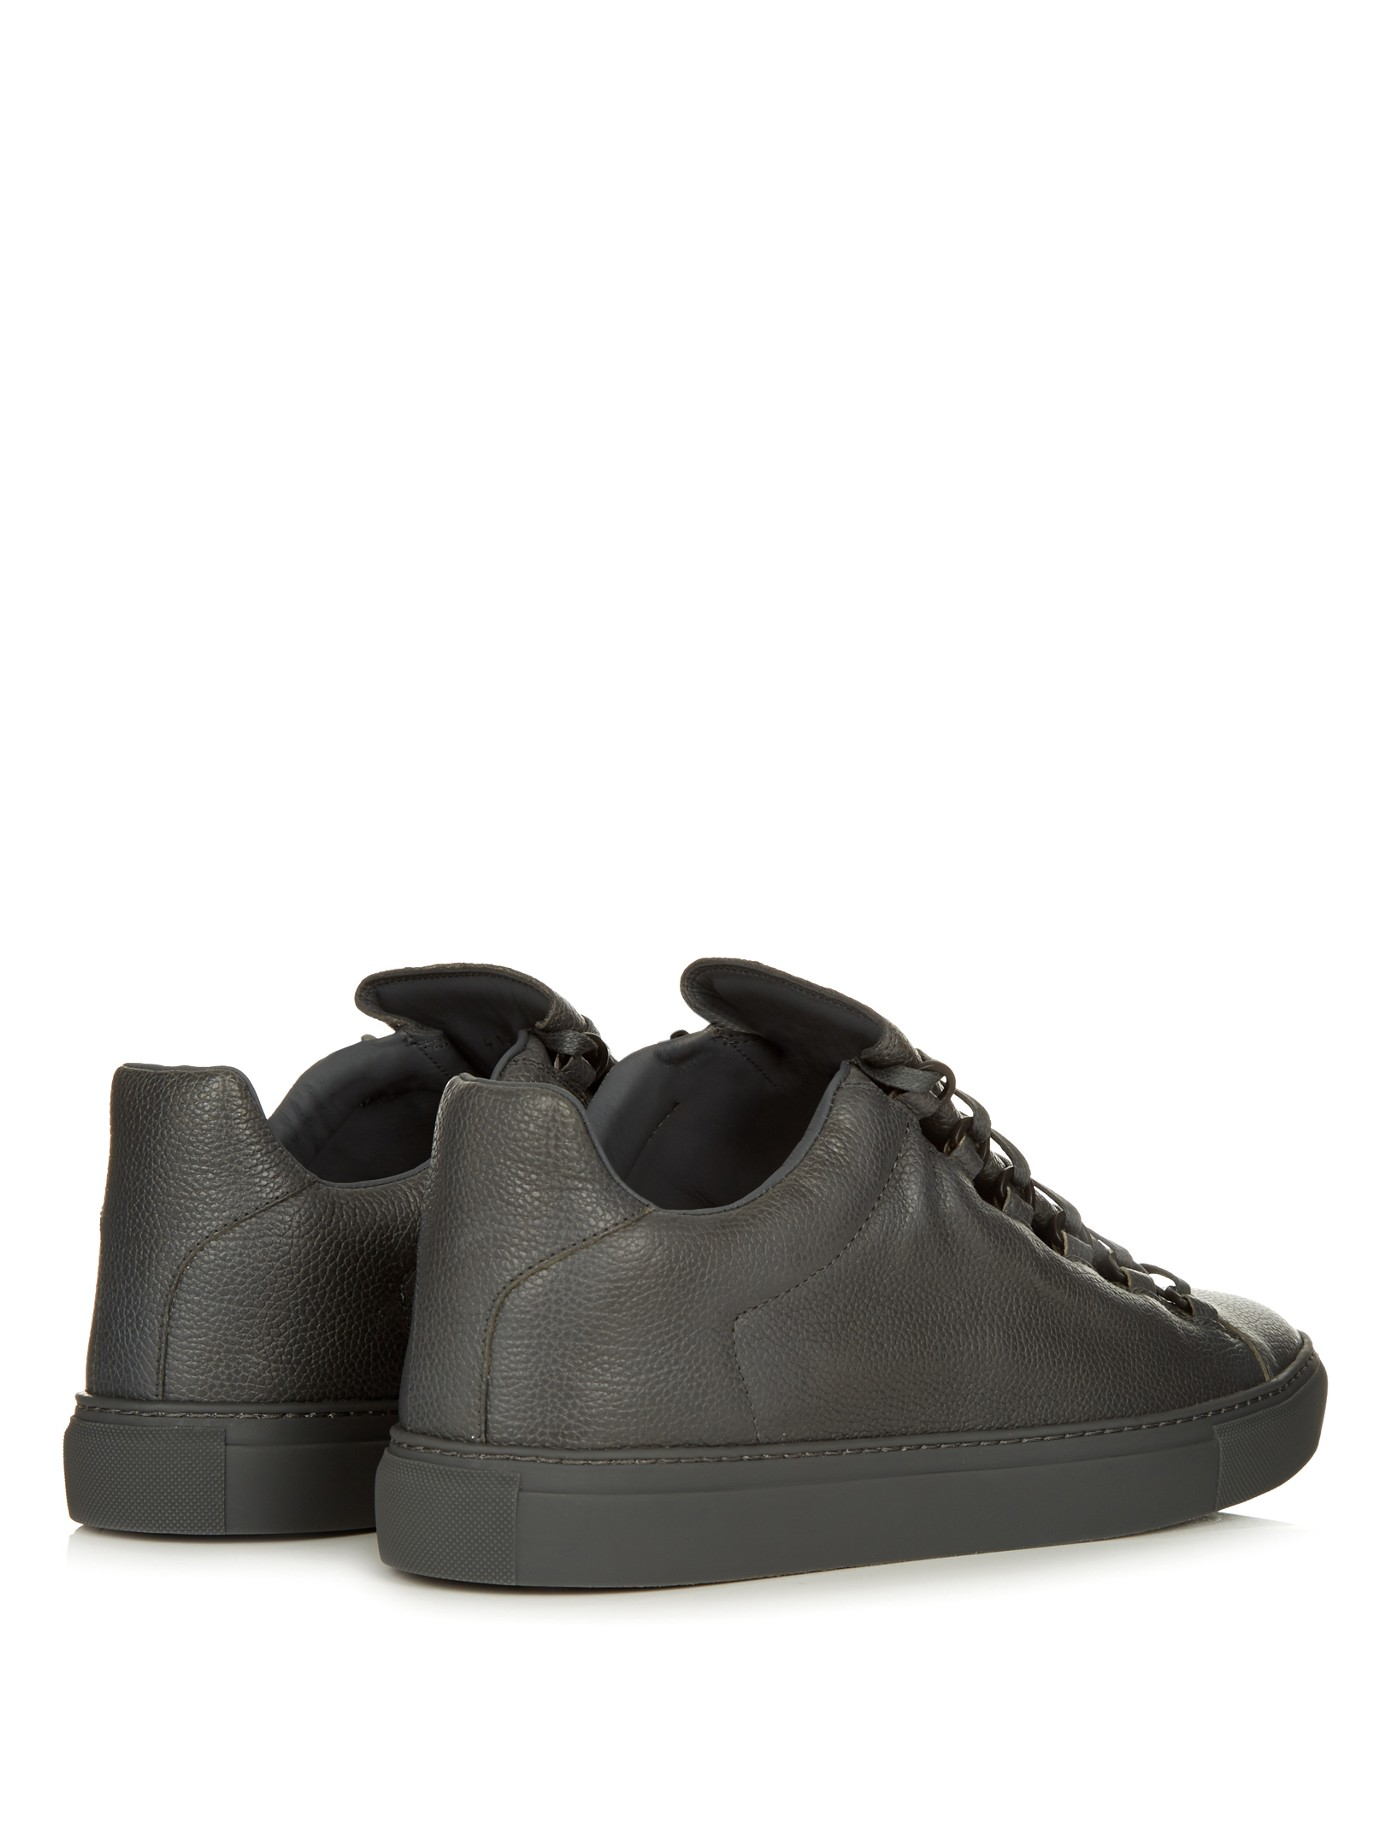 Balenciaga Arena Low-top Leather Trainers in Gray for Men - Lyst